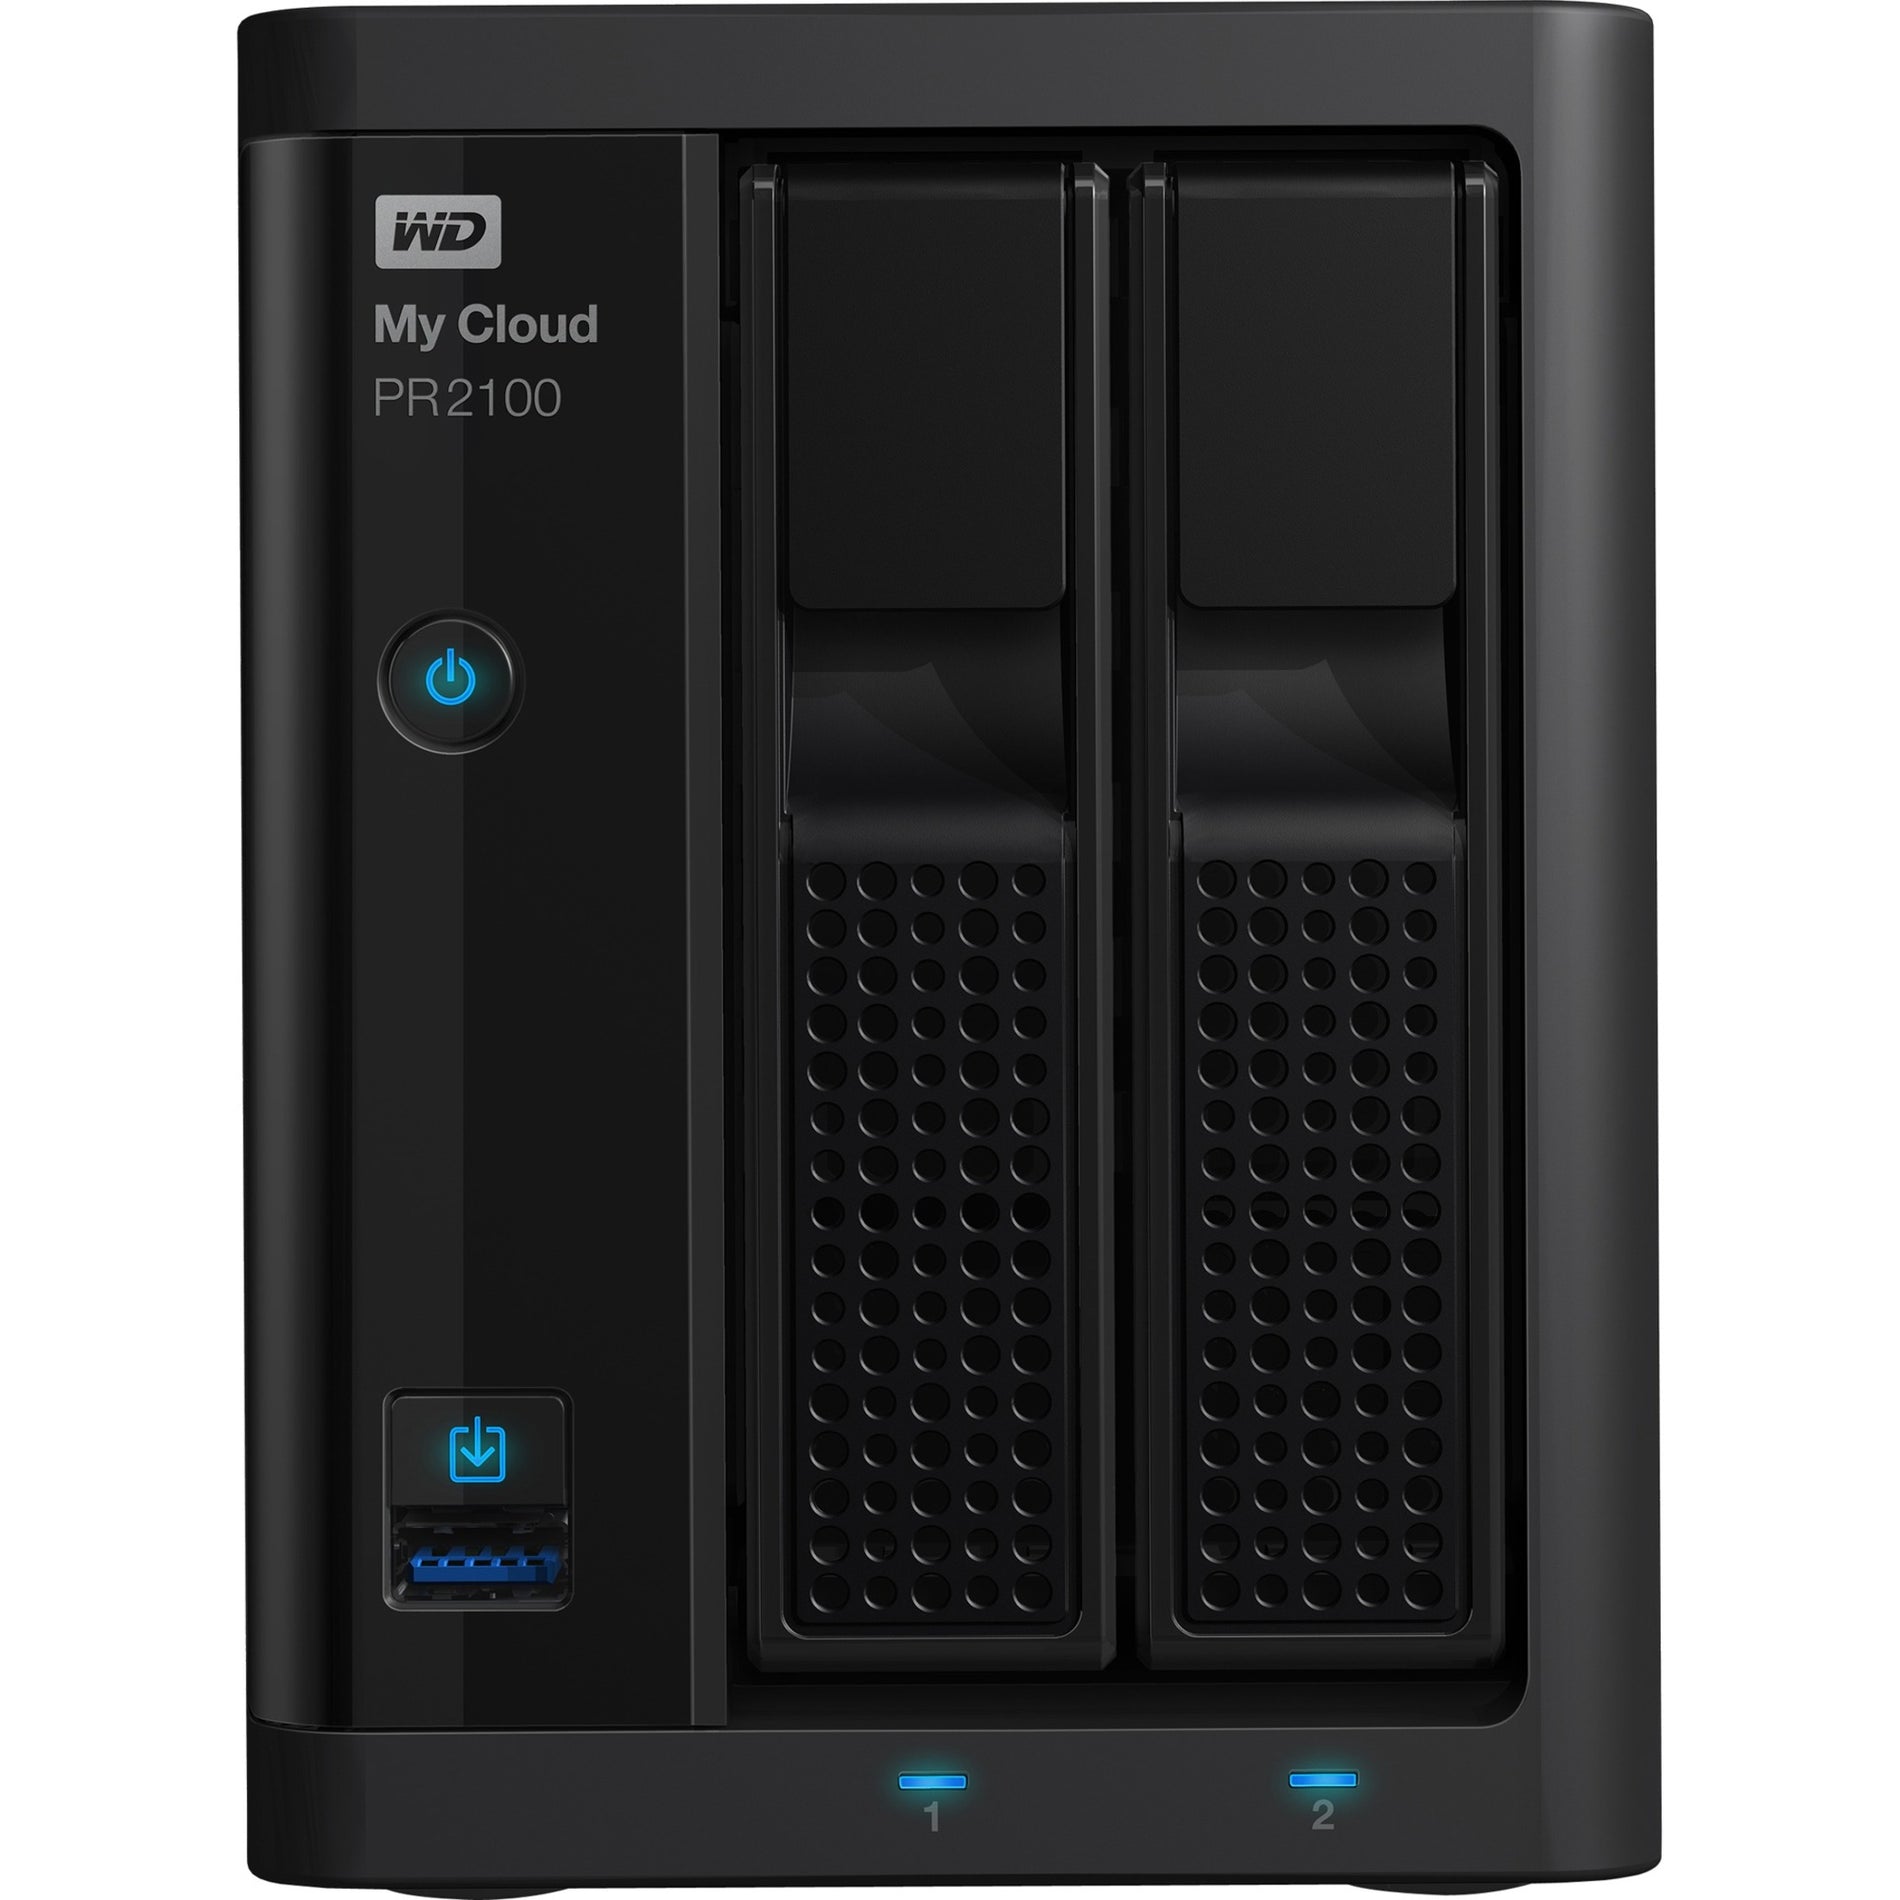 WD WDBBCL0160JBK-NESN 16TB My Cloud PR2100 Pro Series Media Server with Transcoding, NAS - Network Attached Storage